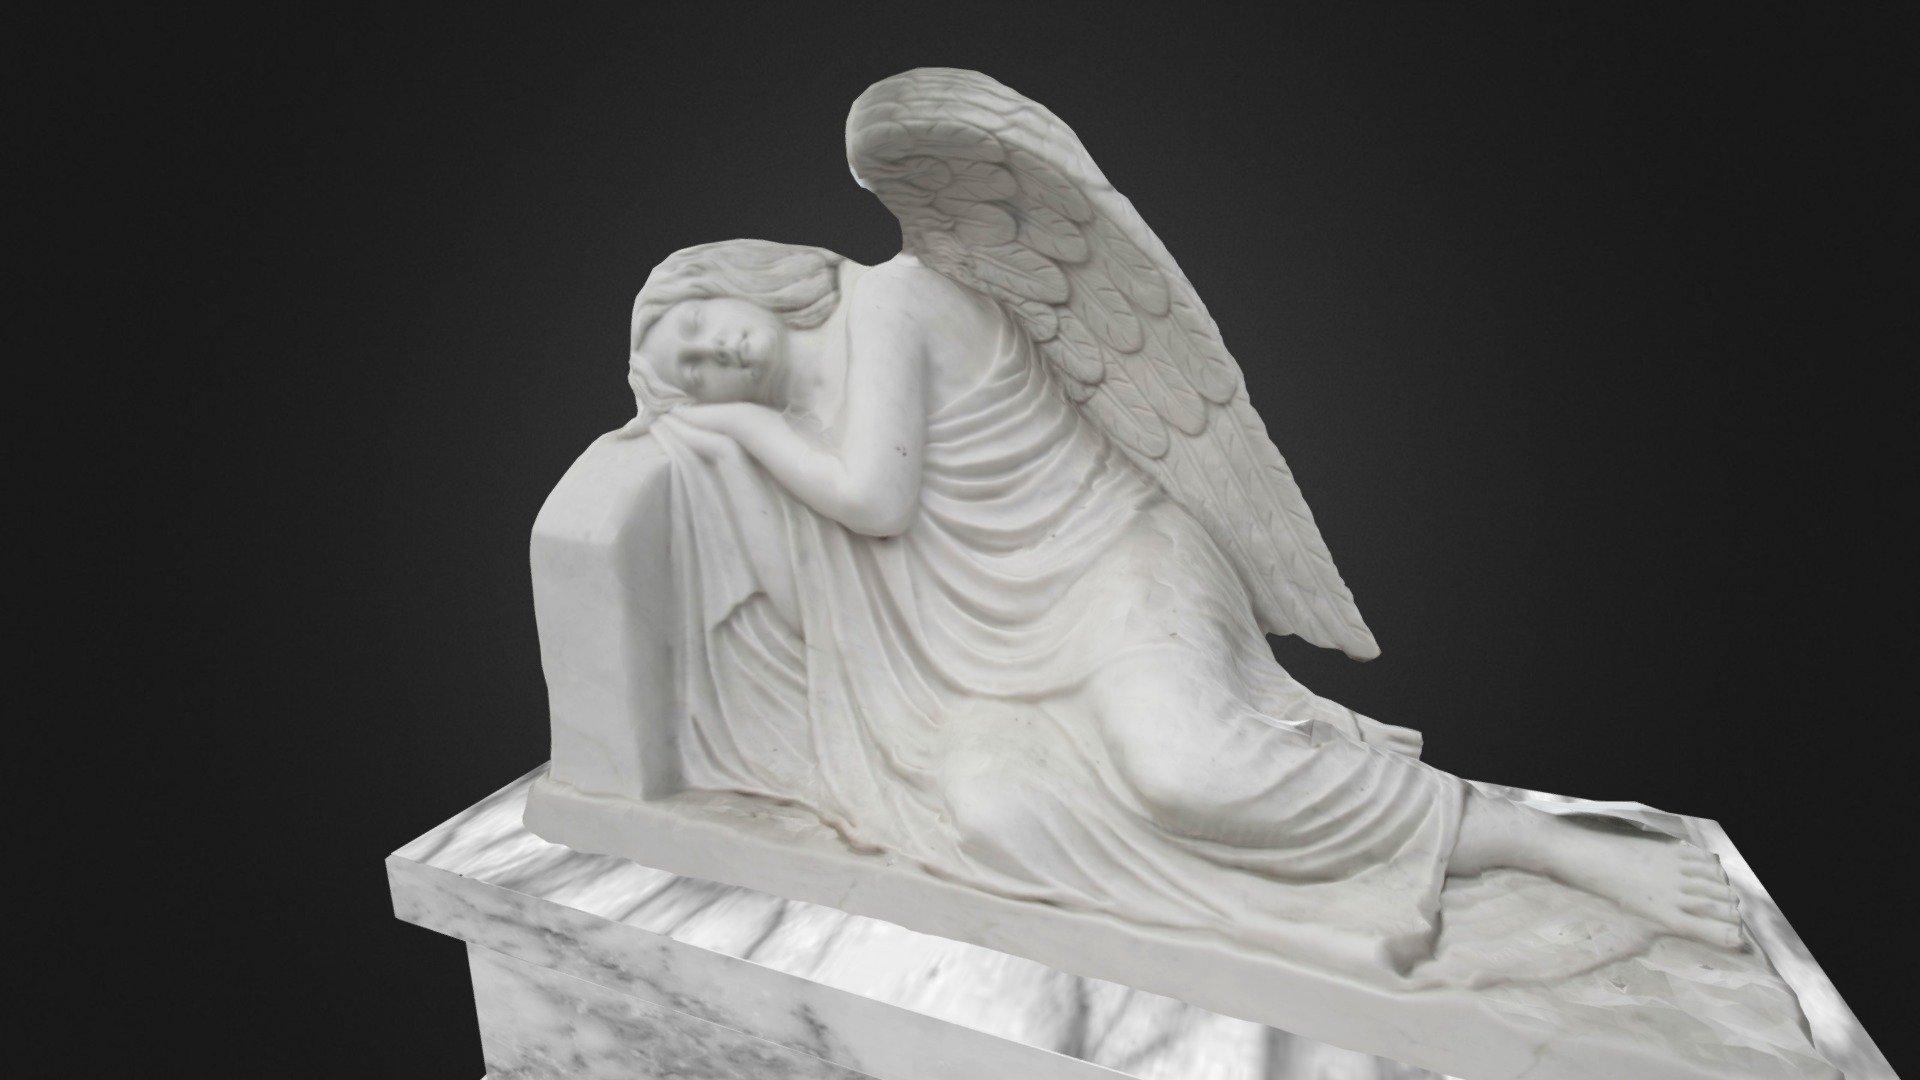 Tomb of The Vera Paez Family (Circa 1930).

With her head over both hands an angel rests on a stone tablet.
One of the many marble stone tombs from the Guayaquil Cemetery in Ecuador.

Location: LAT -2.183130 LON -79.888276 ELE 20 - Tomb of the Vera Paez Family (Circa 1930) 3d model